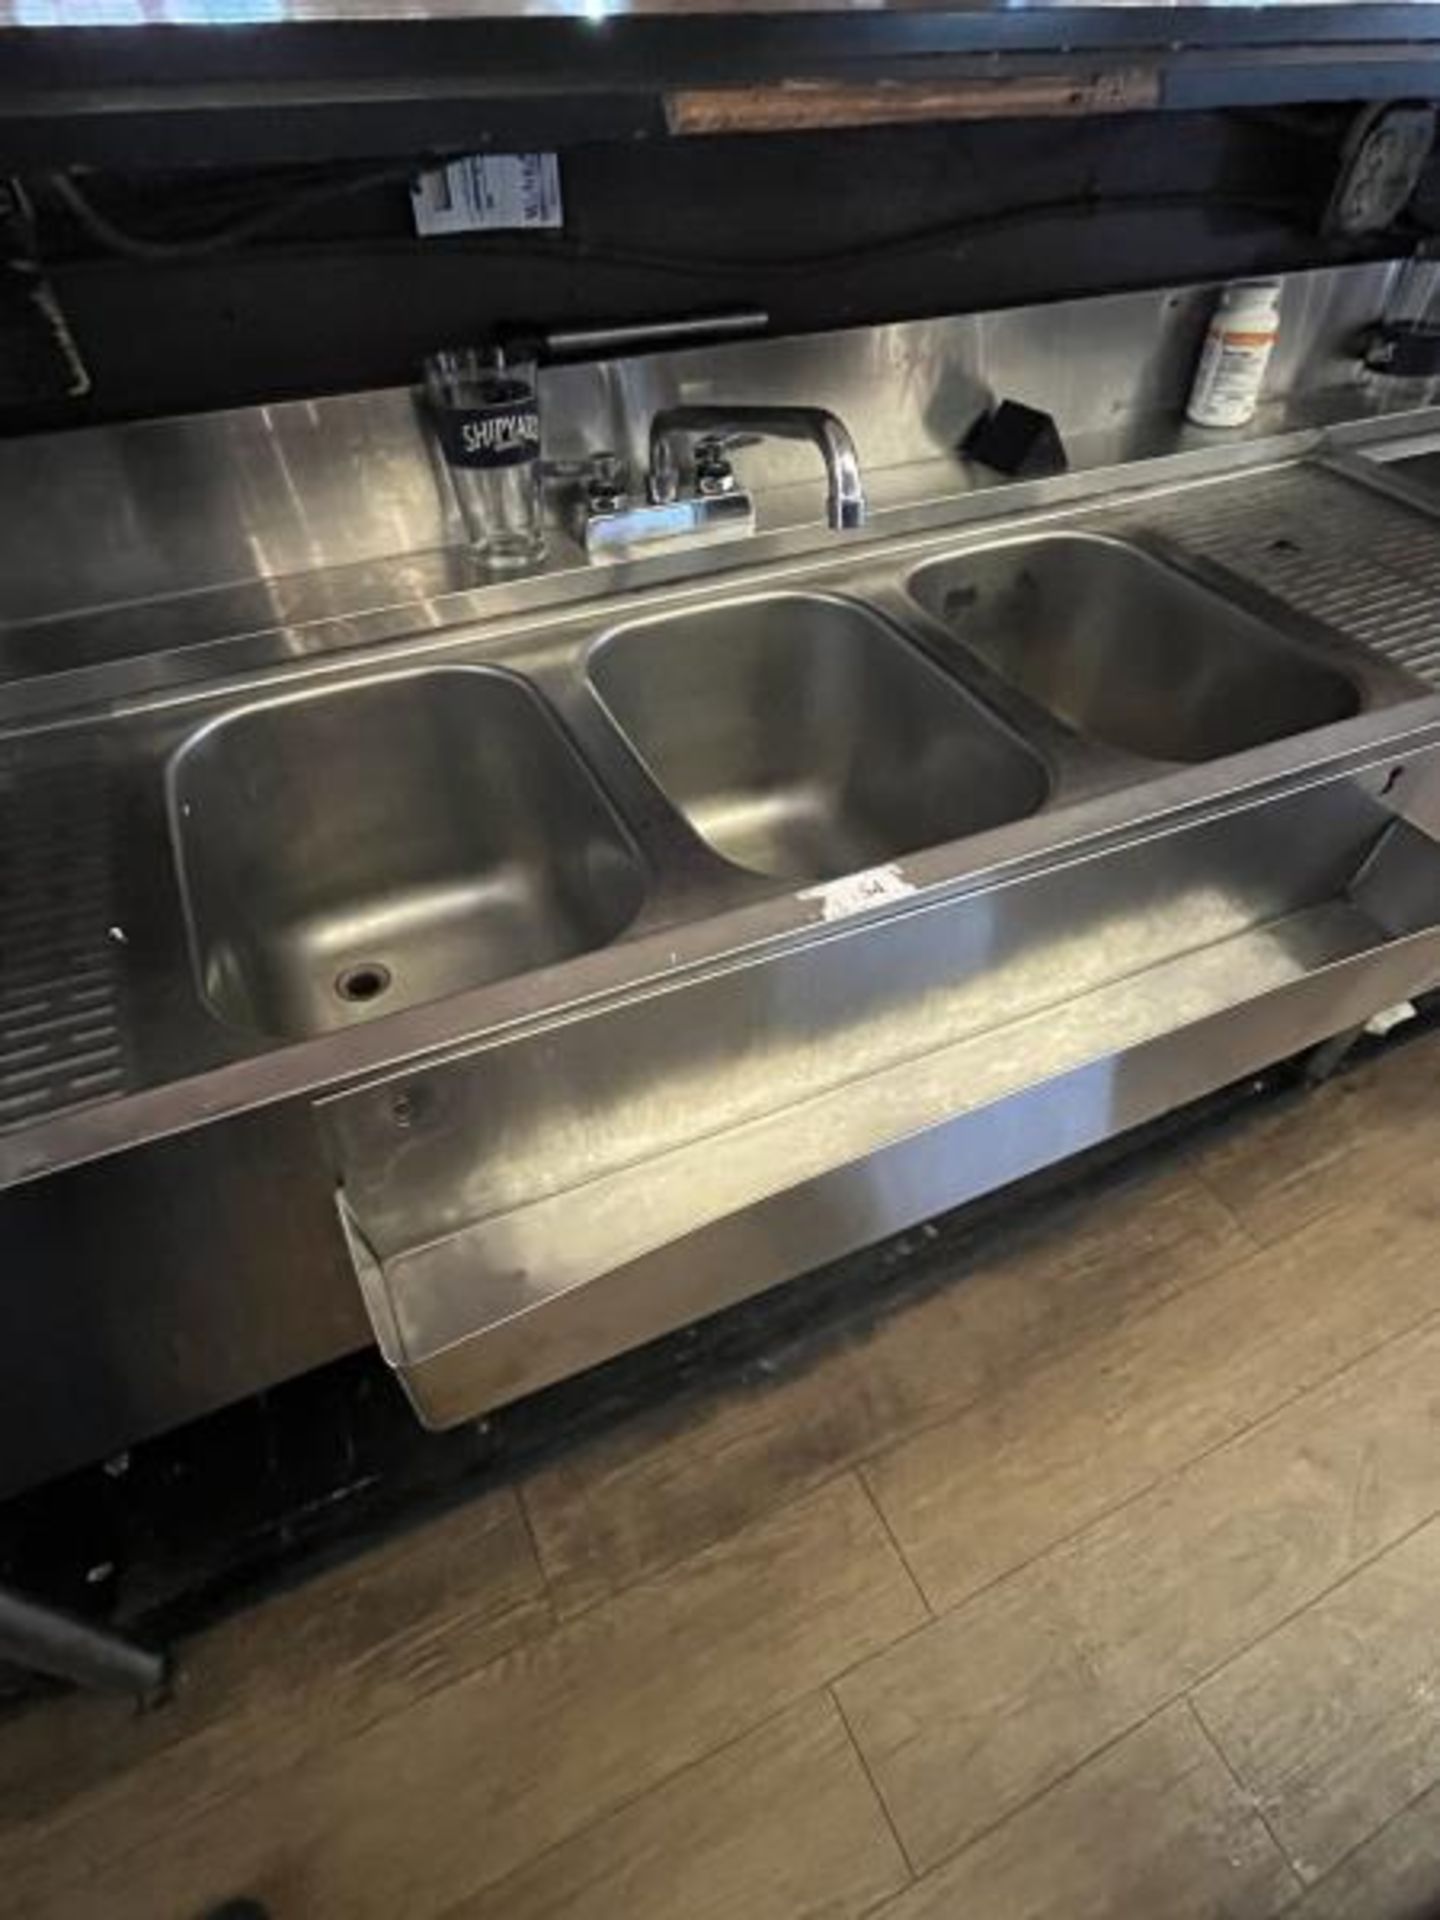 Krowne Back Bar 3-Bay Sink with Attached Ice Bin 95" Long x 23" Deep in Banquet room - Image 2 of 5